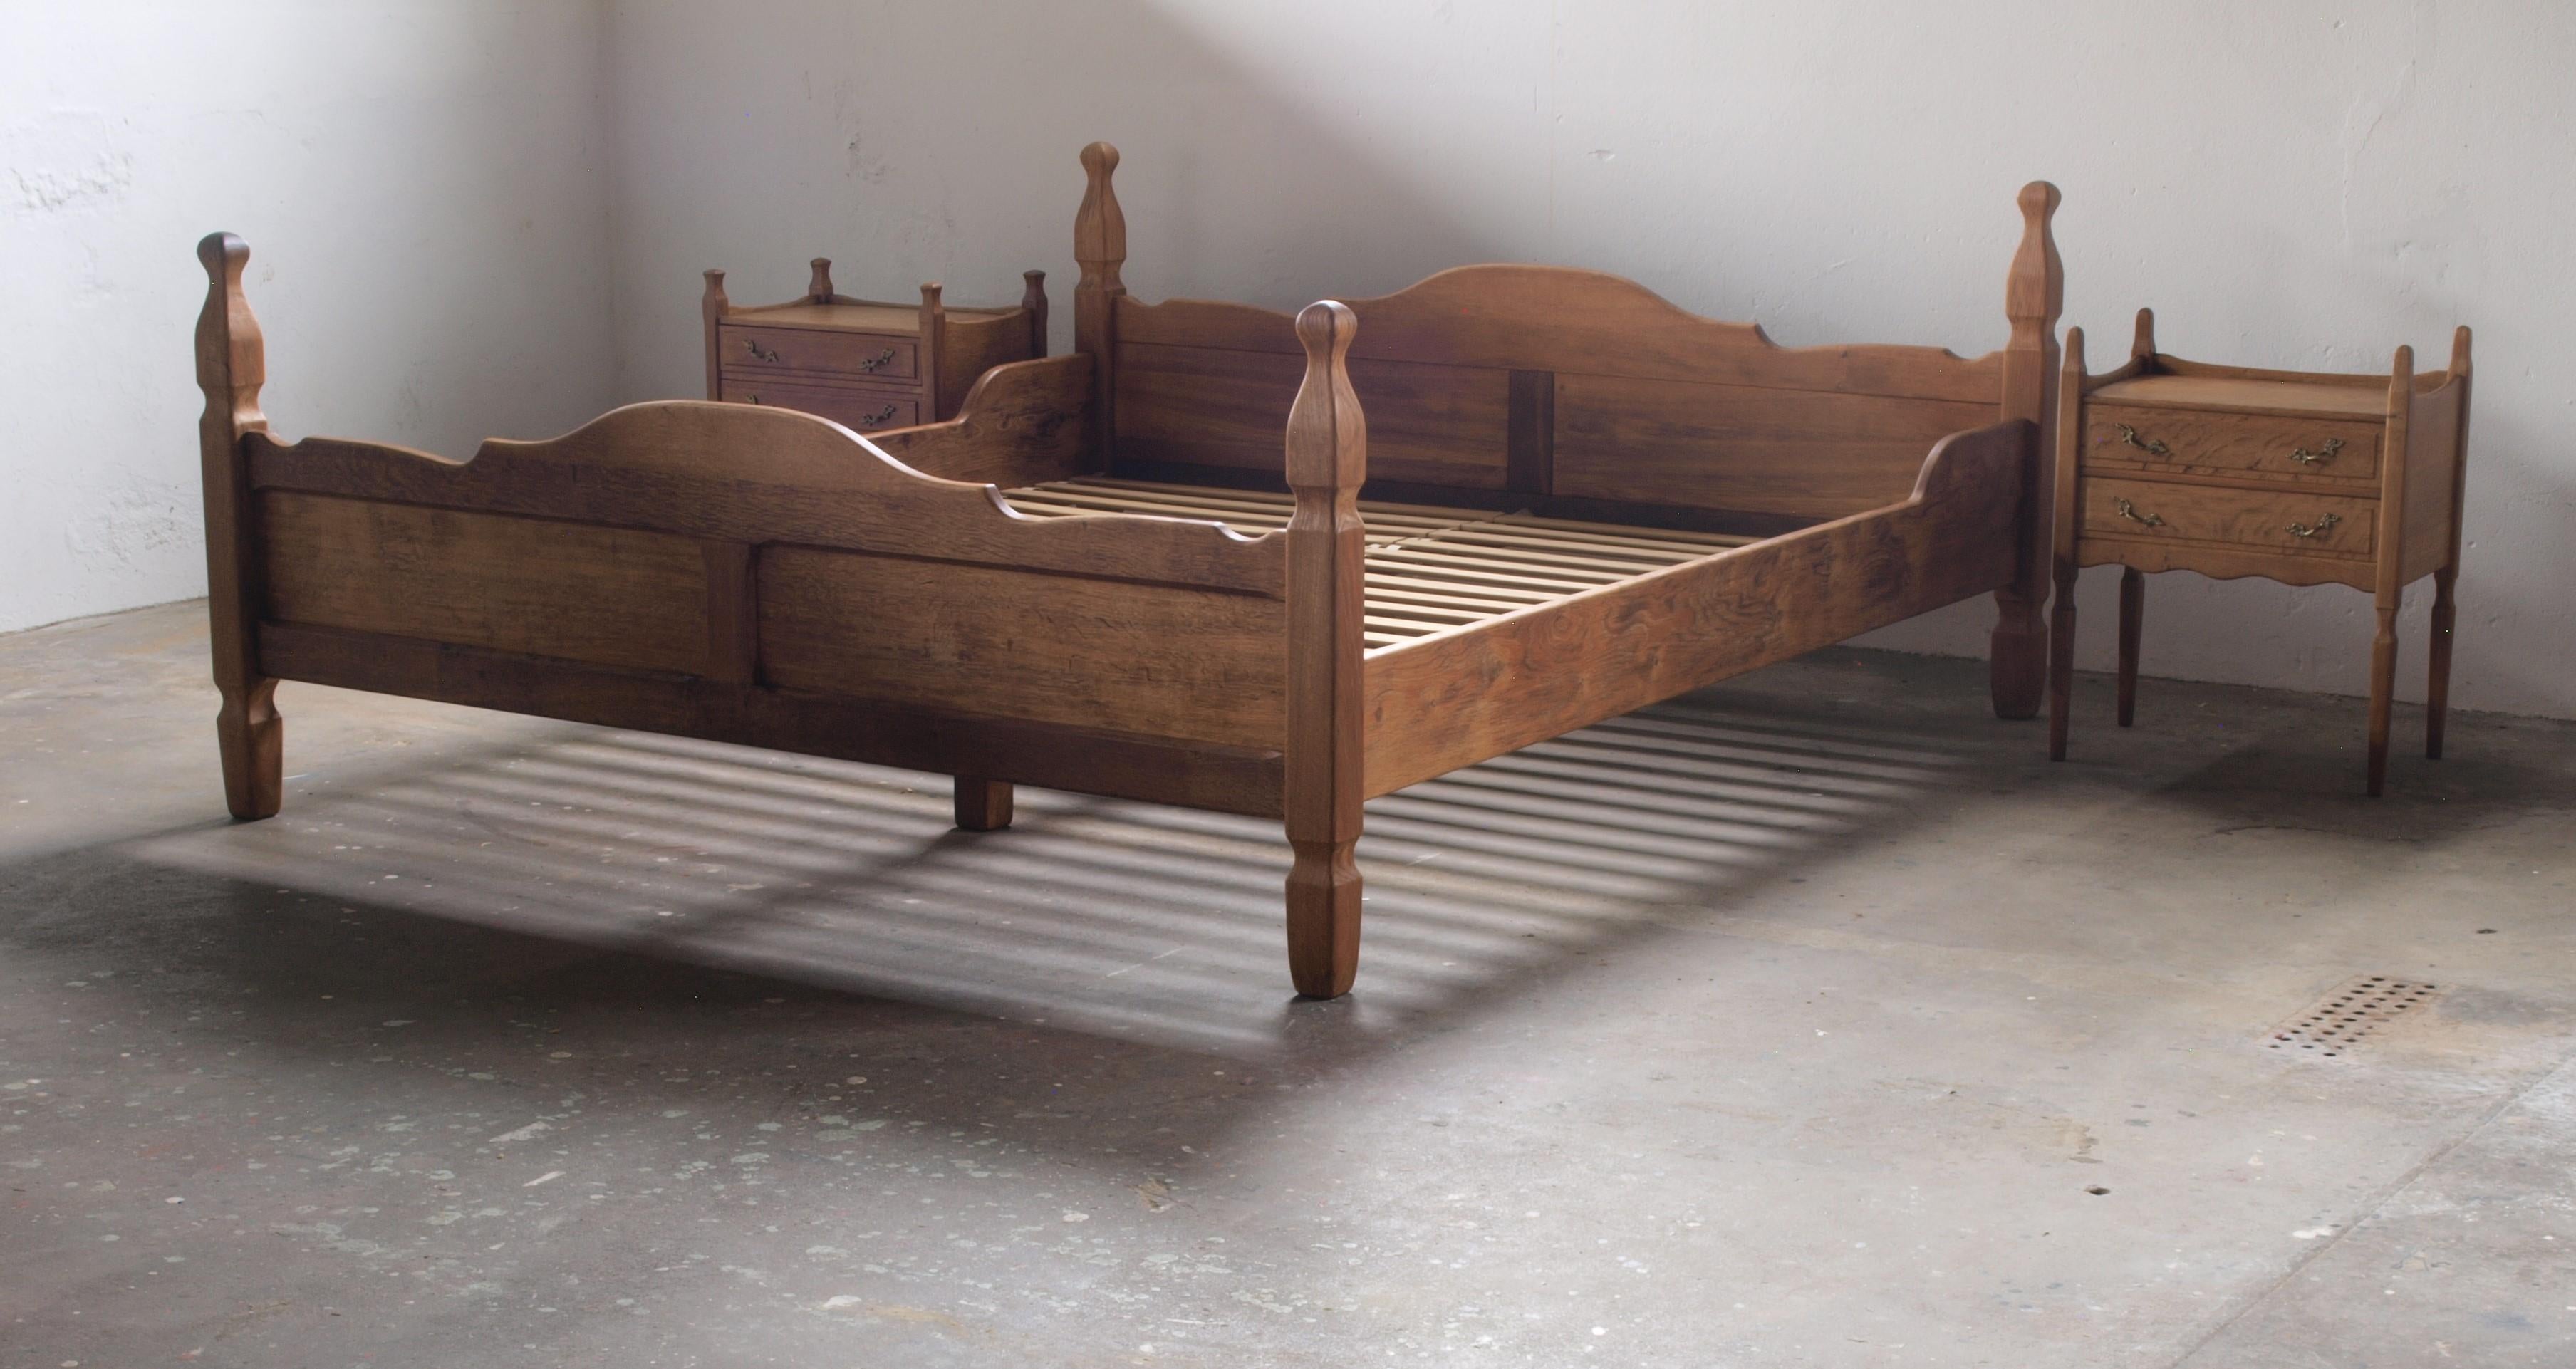 A rare double bed in solid oak. Design attributed Henning Kjærnulf for EG Møbler, Denmark, made around the 1960s. A sculptural piece that combines Baroque style and modernism.

Measure 39cm from floor to the top of the surface of the matress. This